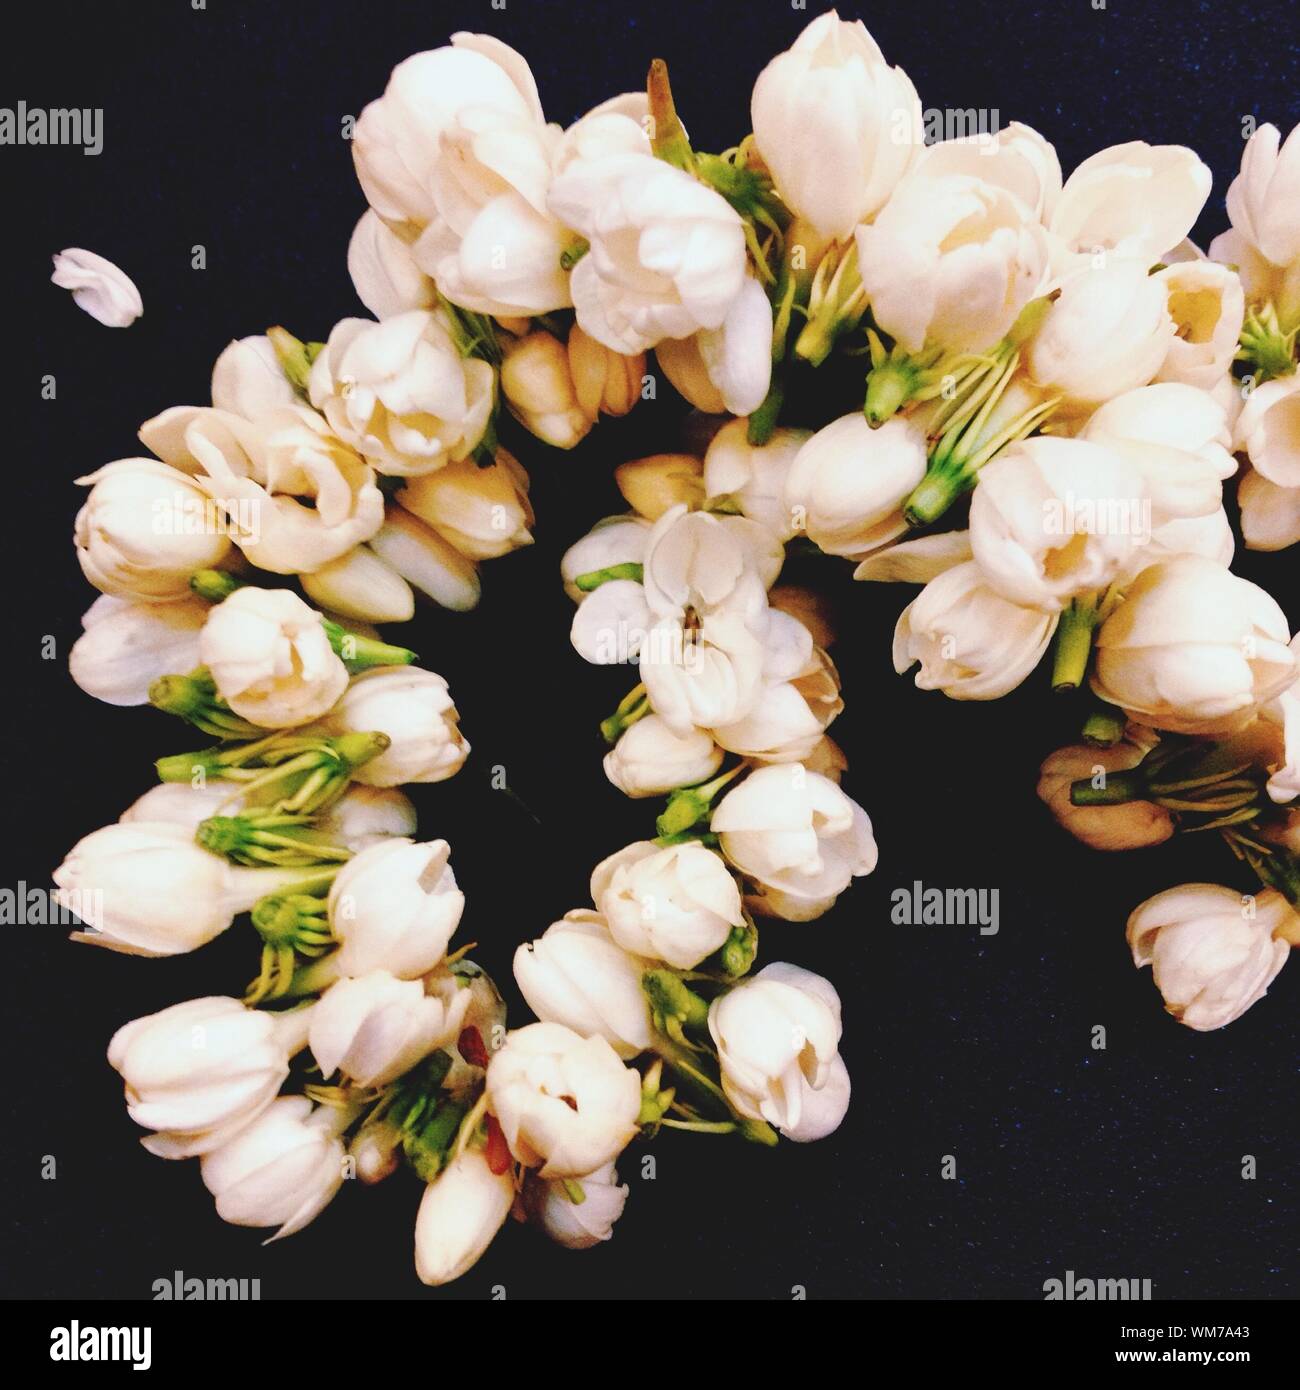 Bunch Of Flowers On Black Background Stock Photo